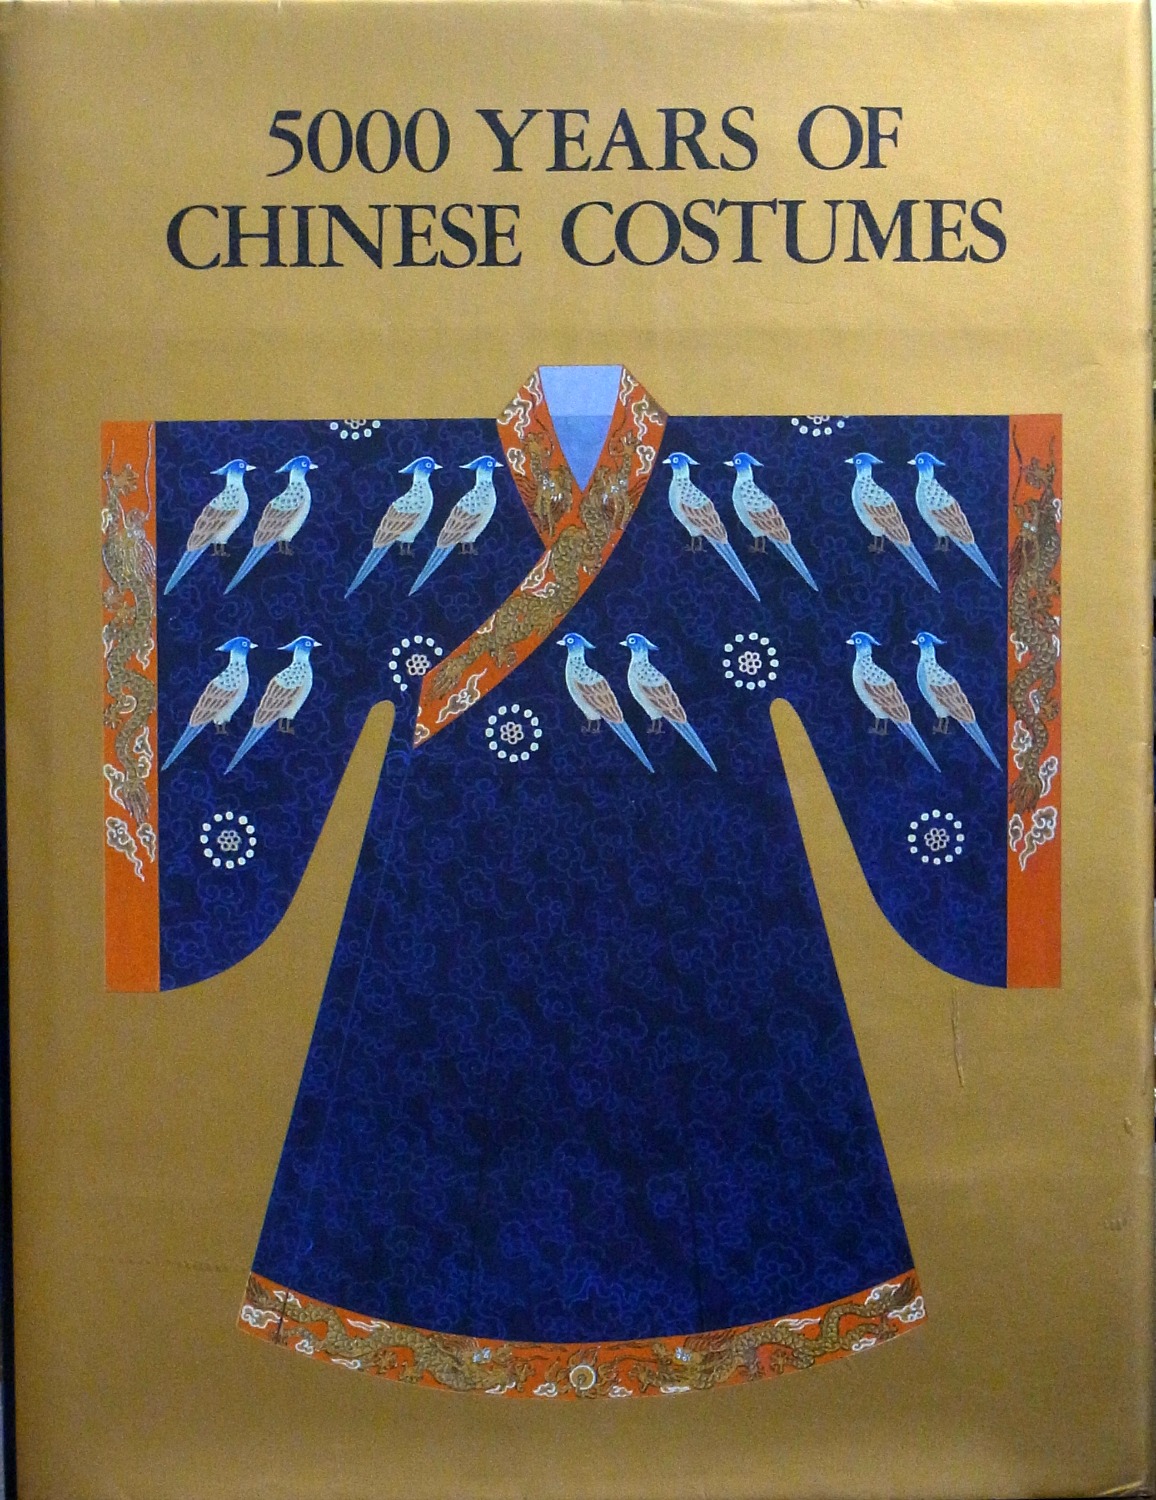 5000 years of Chinese costumes.